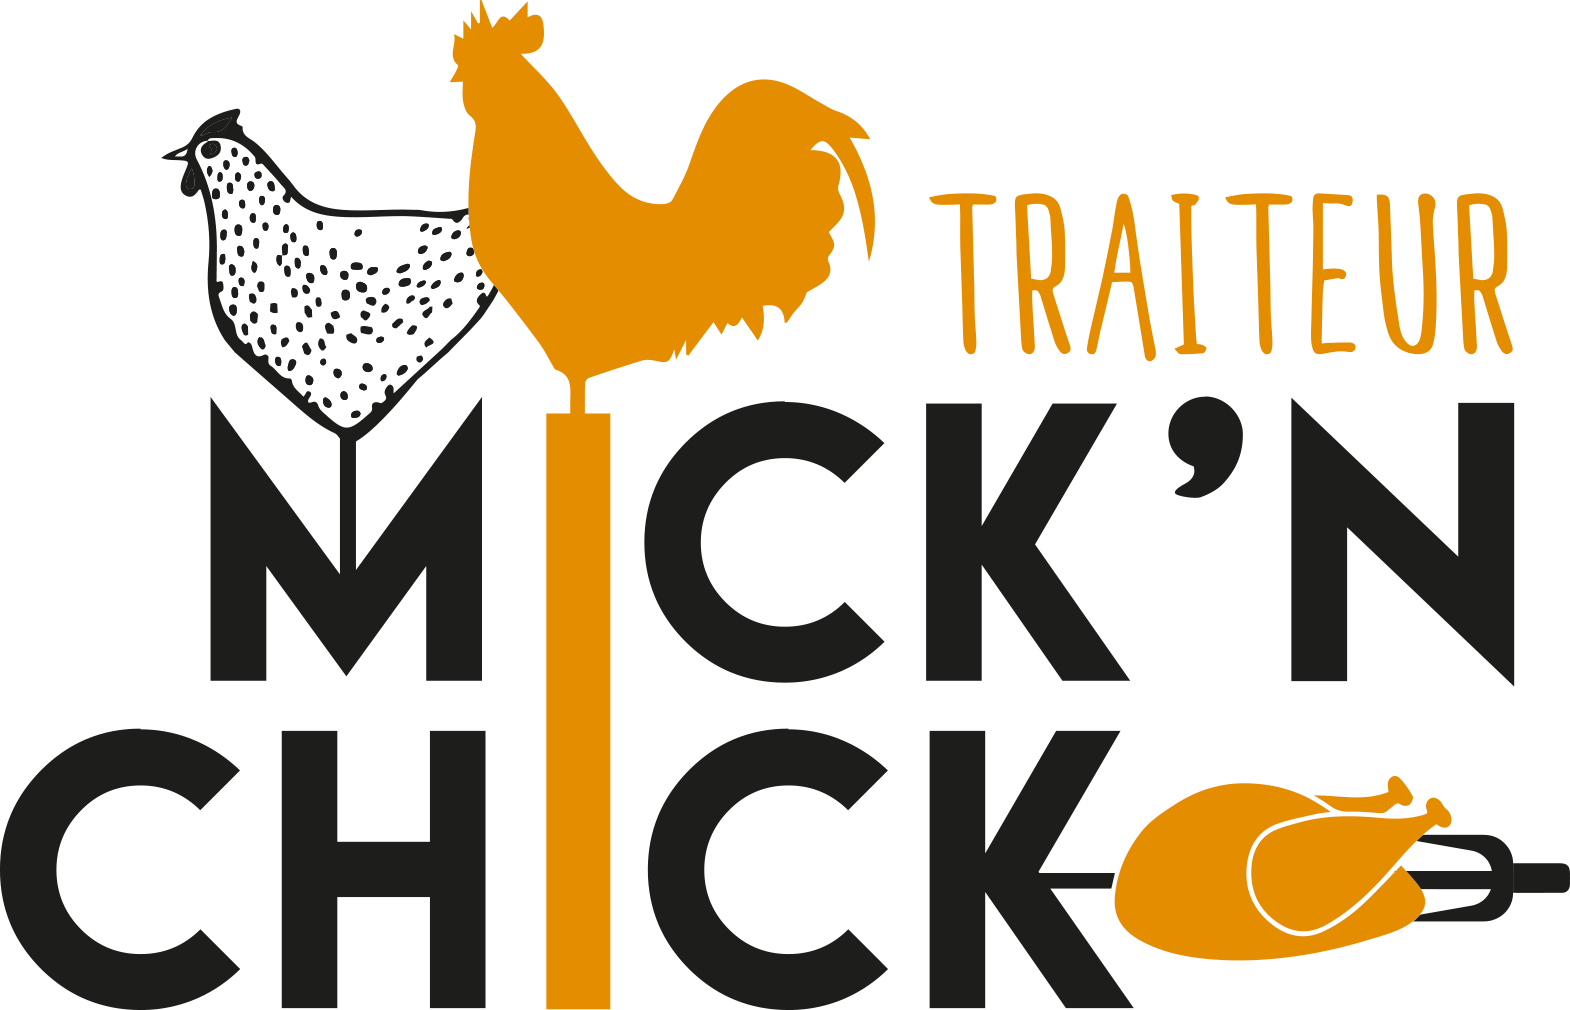 Mick 'n Chick - Chicken and more